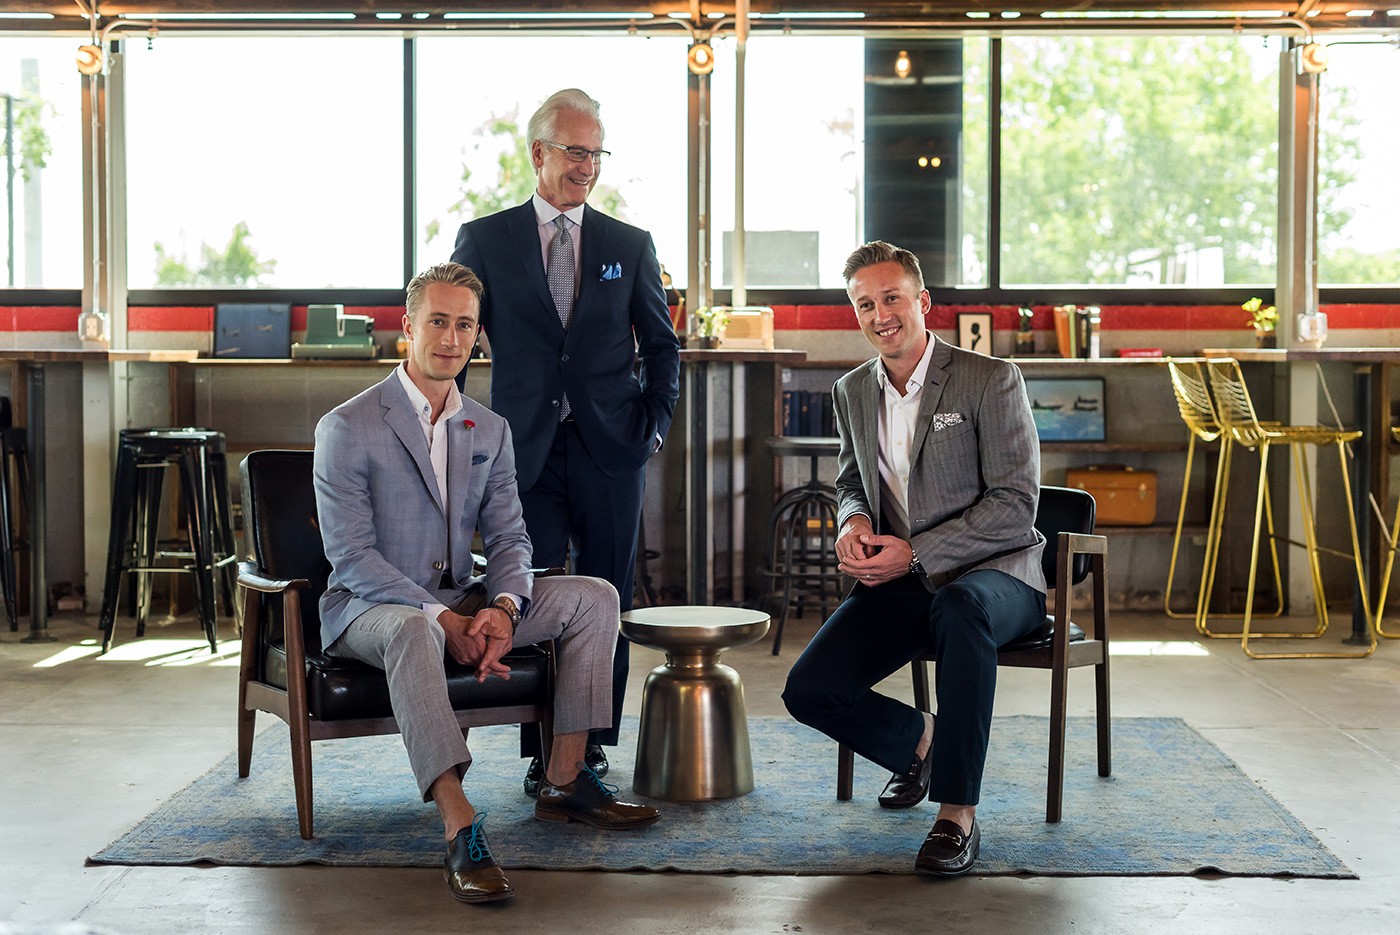 Bespoke Edge team and our suits